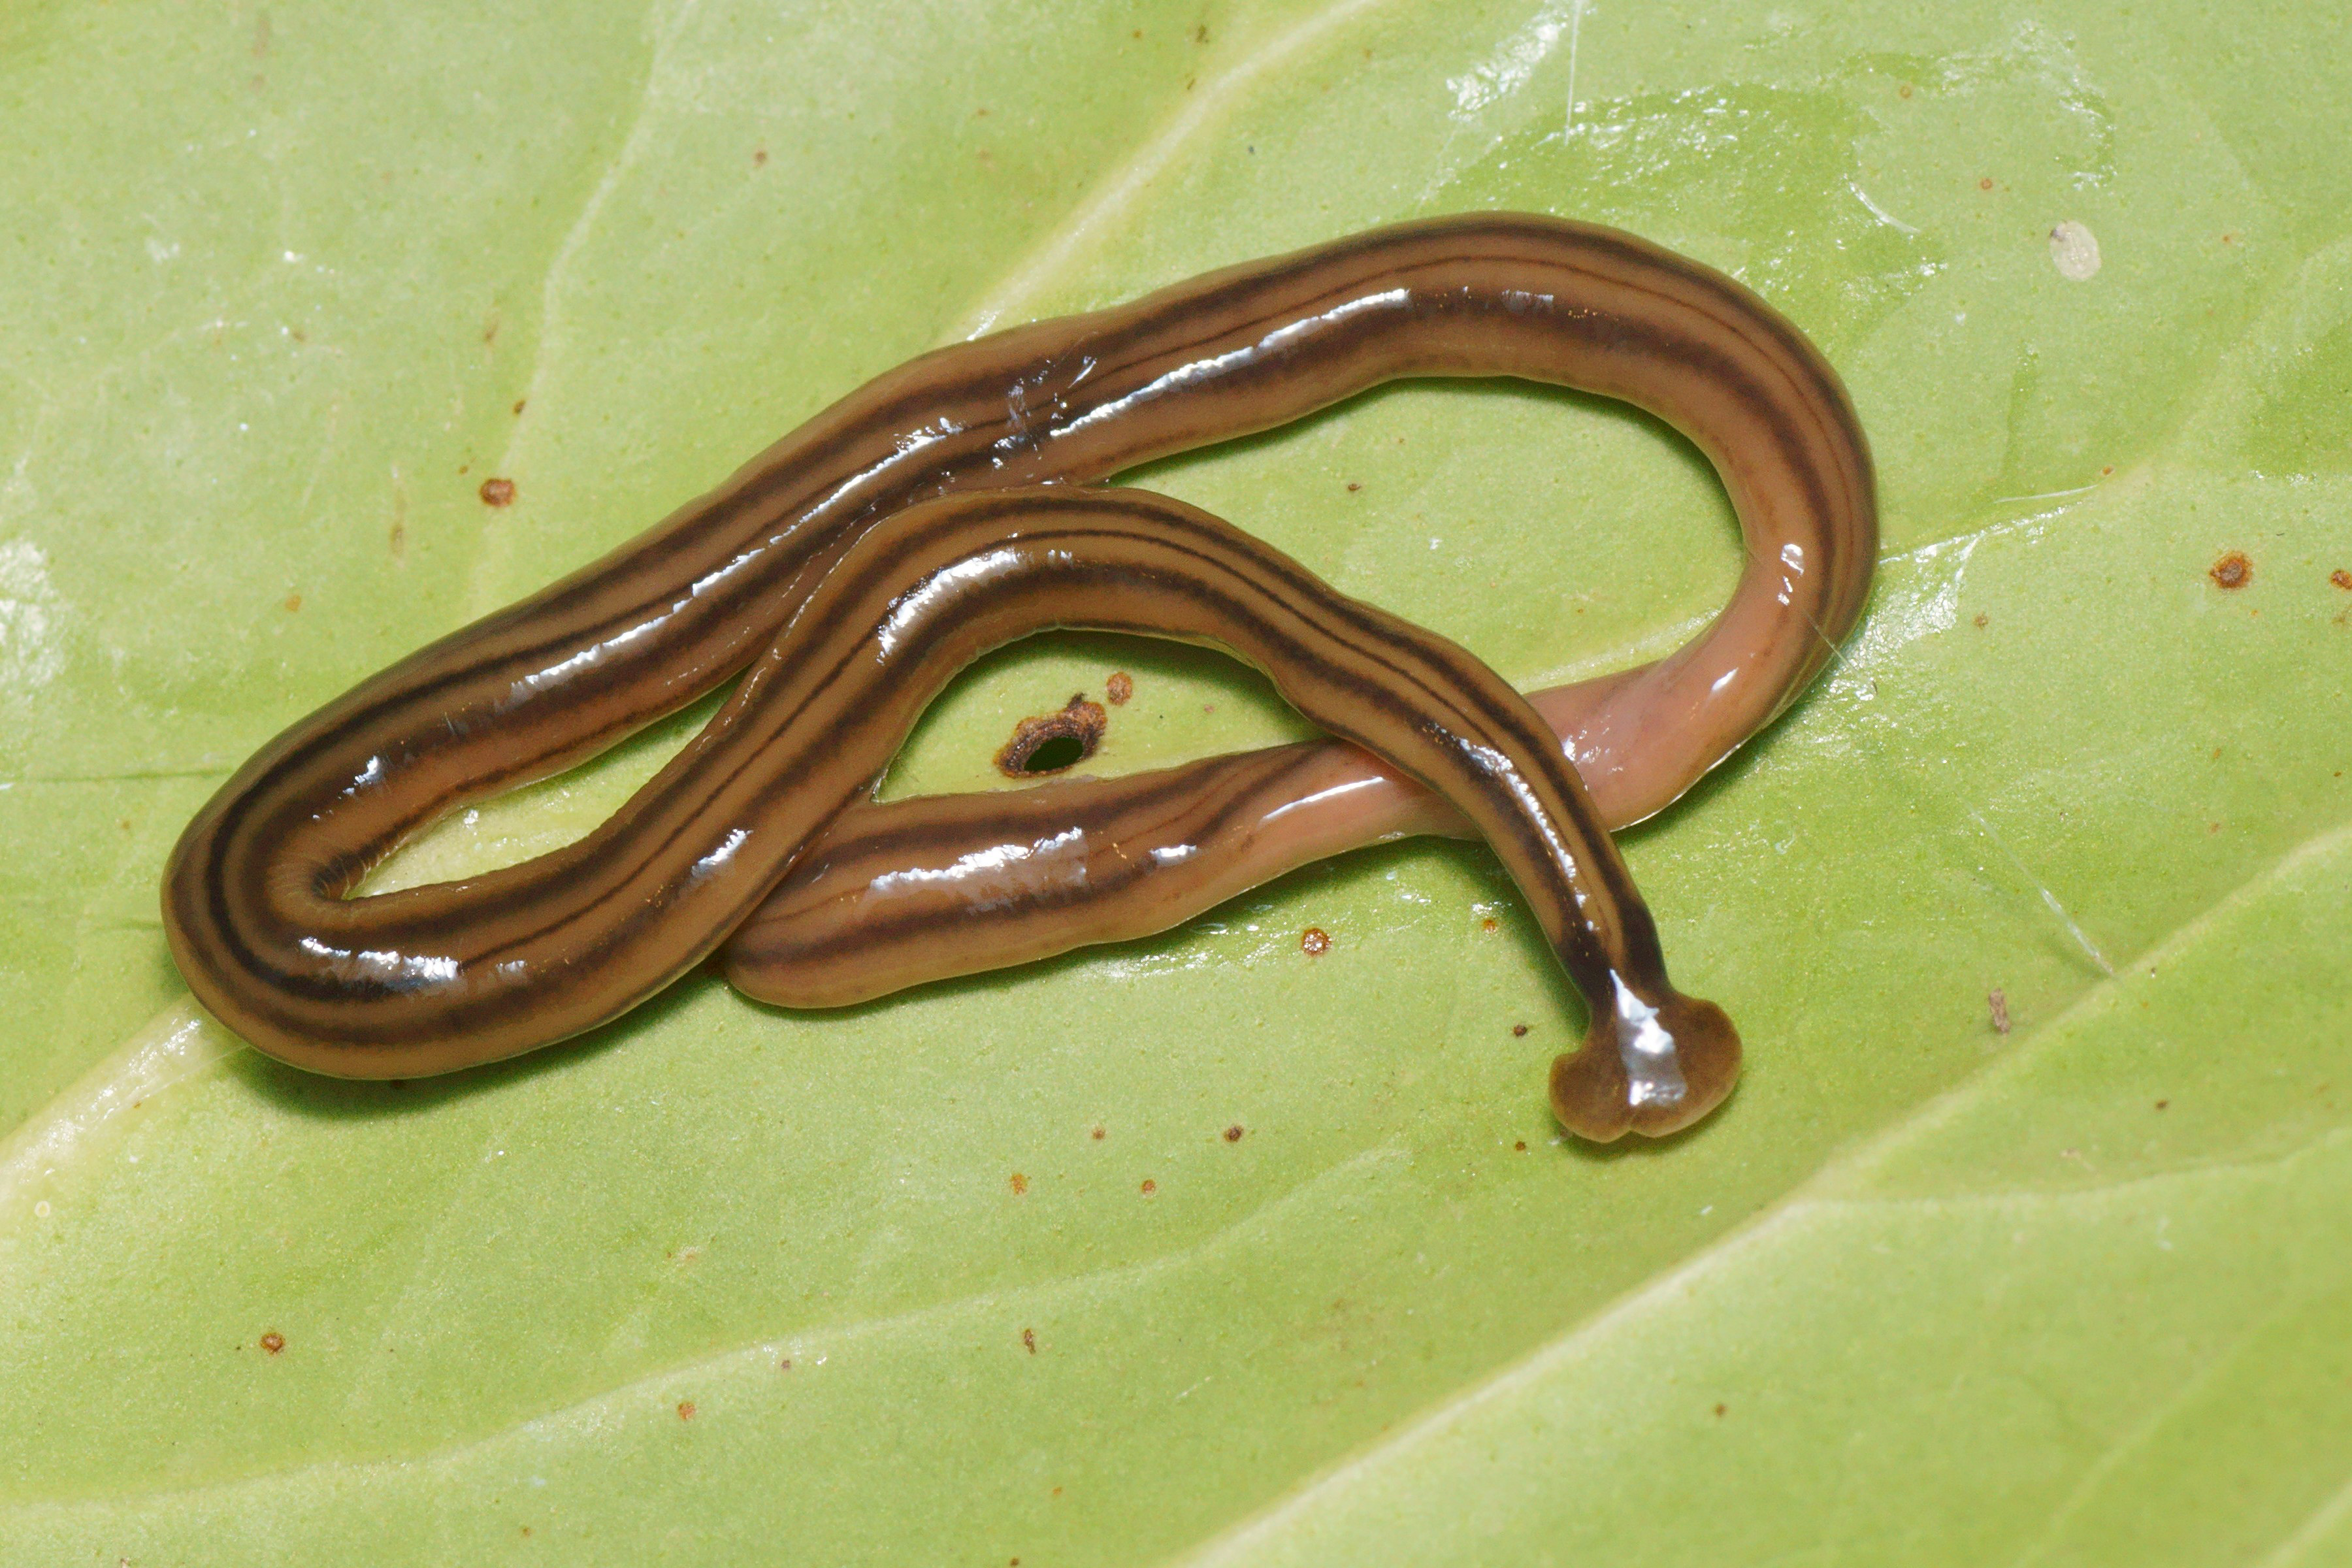 Bipalium_kewense_By Jean-Lou Justine​, Leigh Winsor, Delphine Gey, Pierre Gros, and Jessica Thévenot - (2018). "Giant worms chez moi! Hammerhead flatworms (Platyhelminthes, Geoplanidae, Bipalium spp., Diversibipalium spp.) in metropolitan France and overseas French territories". PeerJ 6: e4672. DOI:10.7717/peerj.4672. ISSN 2167-8359., CC BY-SA 4.0, https://commons.wikimedia.org/w/index.php?curid=69500946